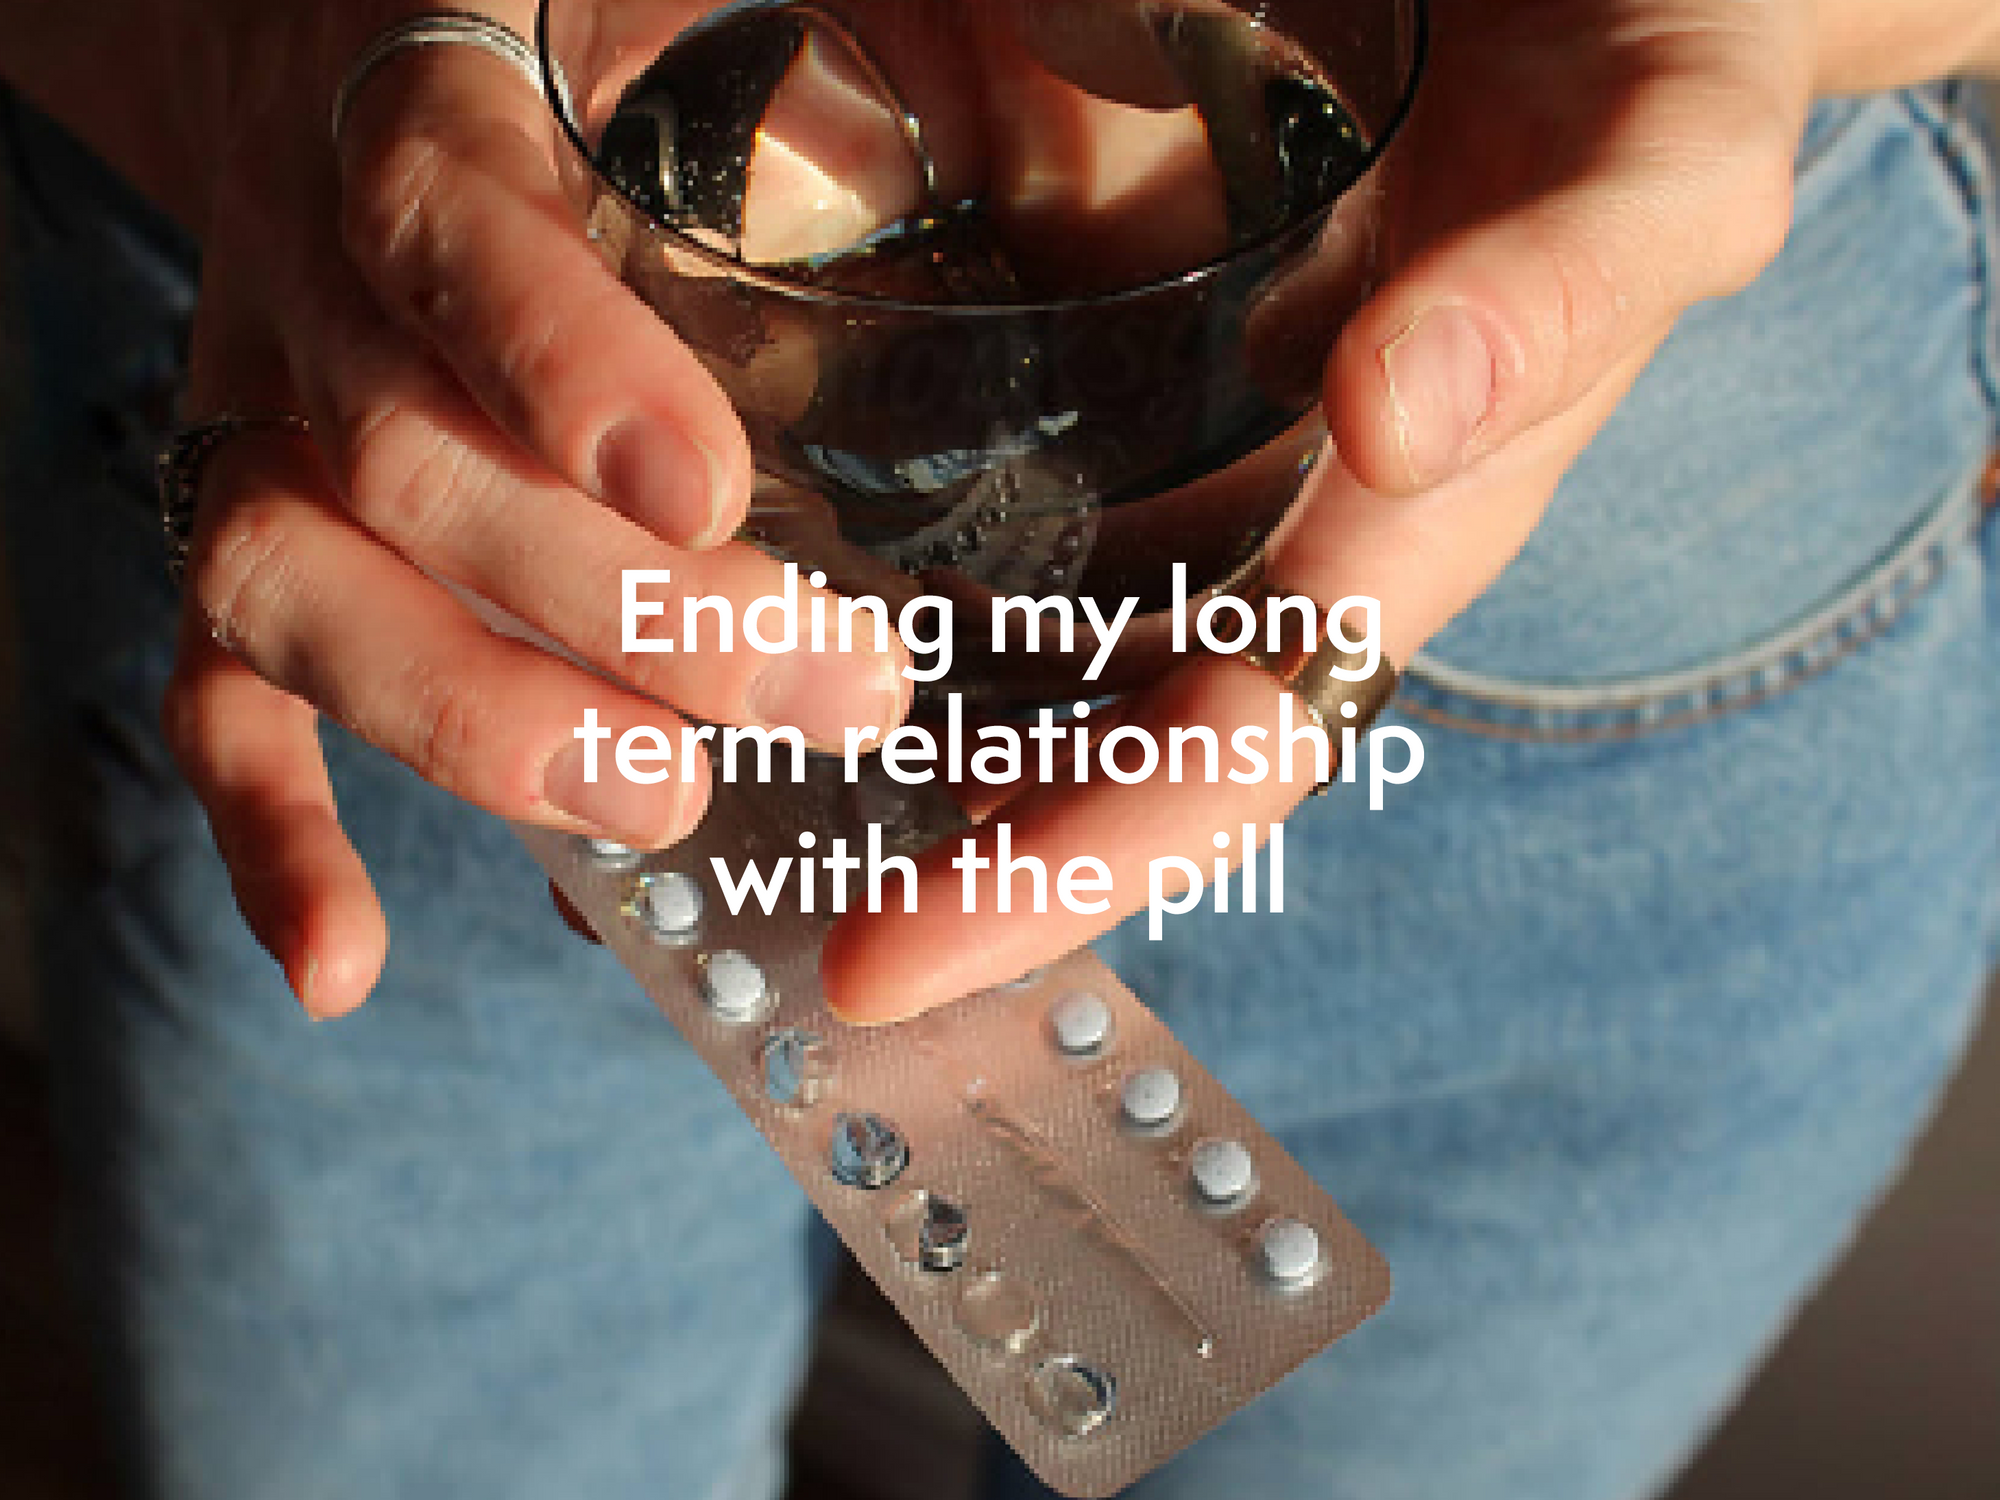 Ending my long term relationship with the pill